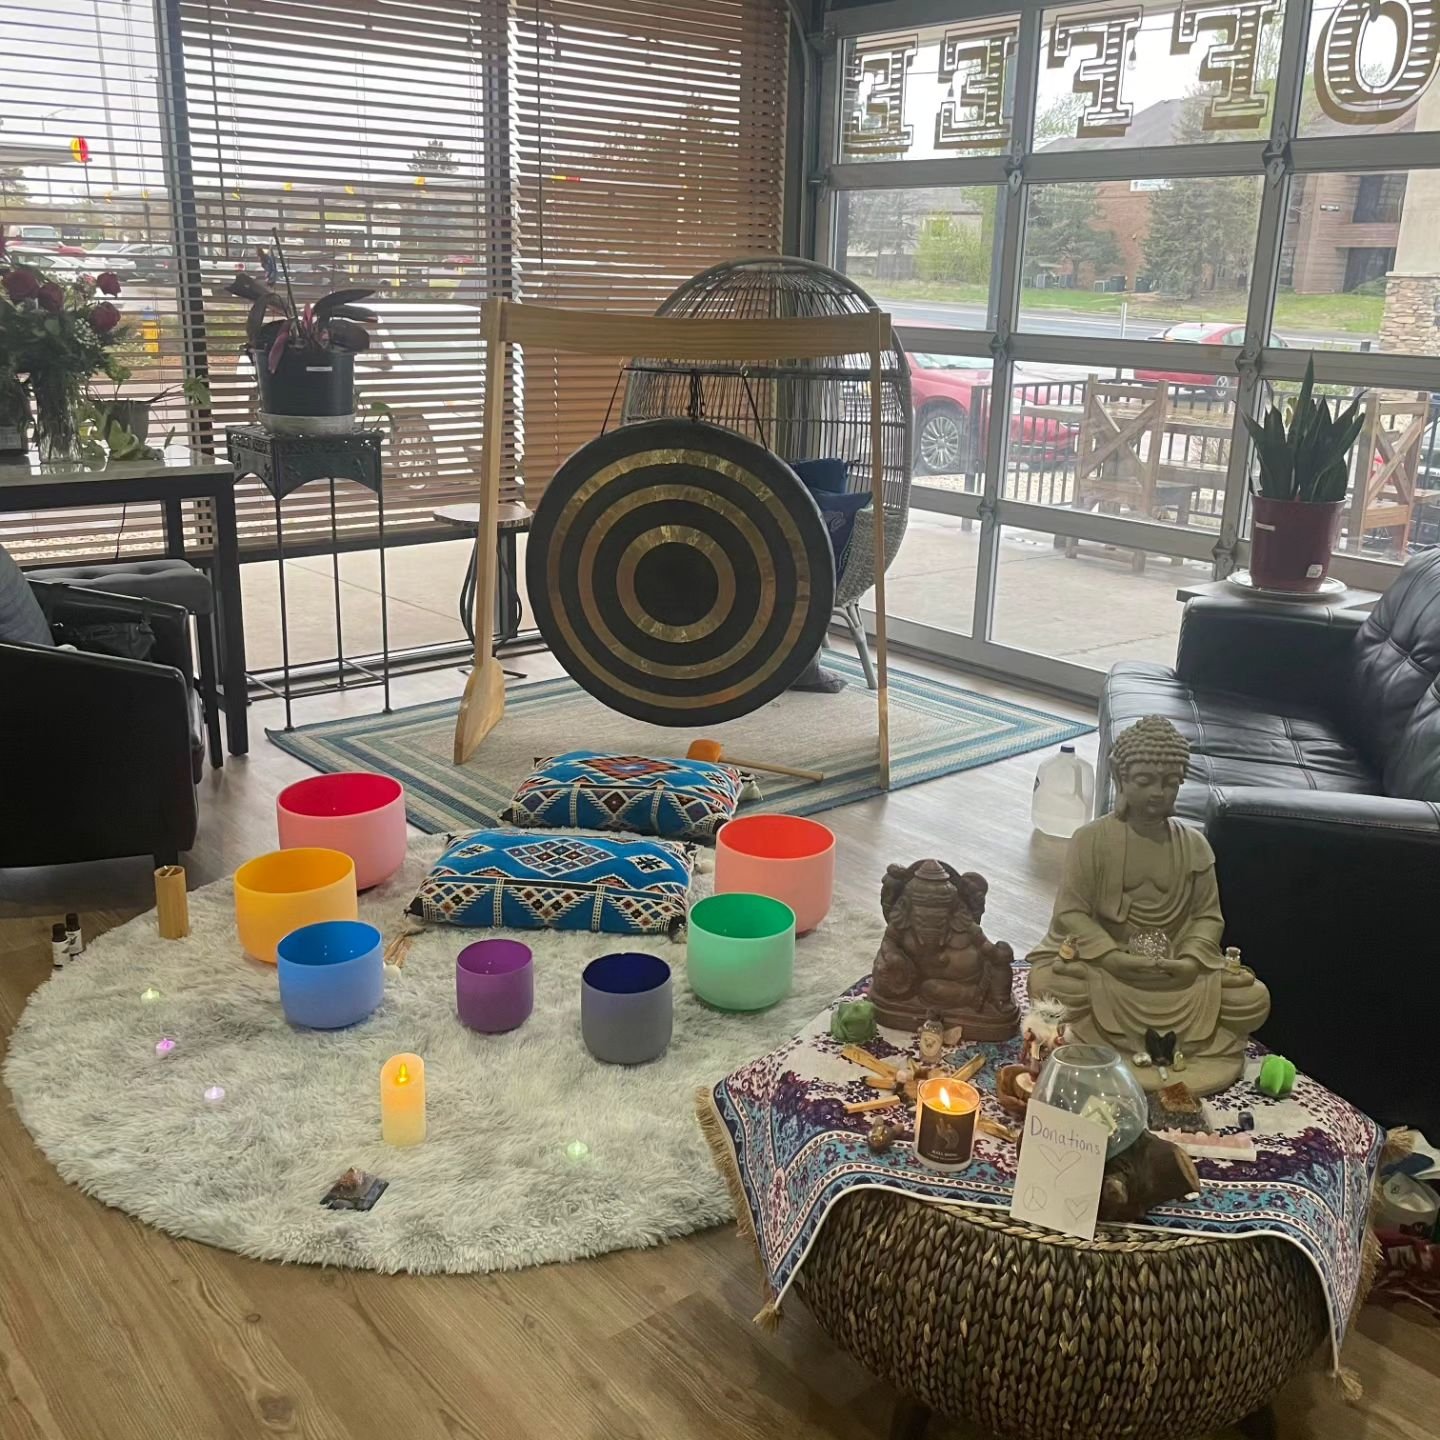 Ryan Irish and Tasha Hannah hosted a free sound bath session to realtors and community members. This was their set up tonight!! #communityspace #healing #communitycafe